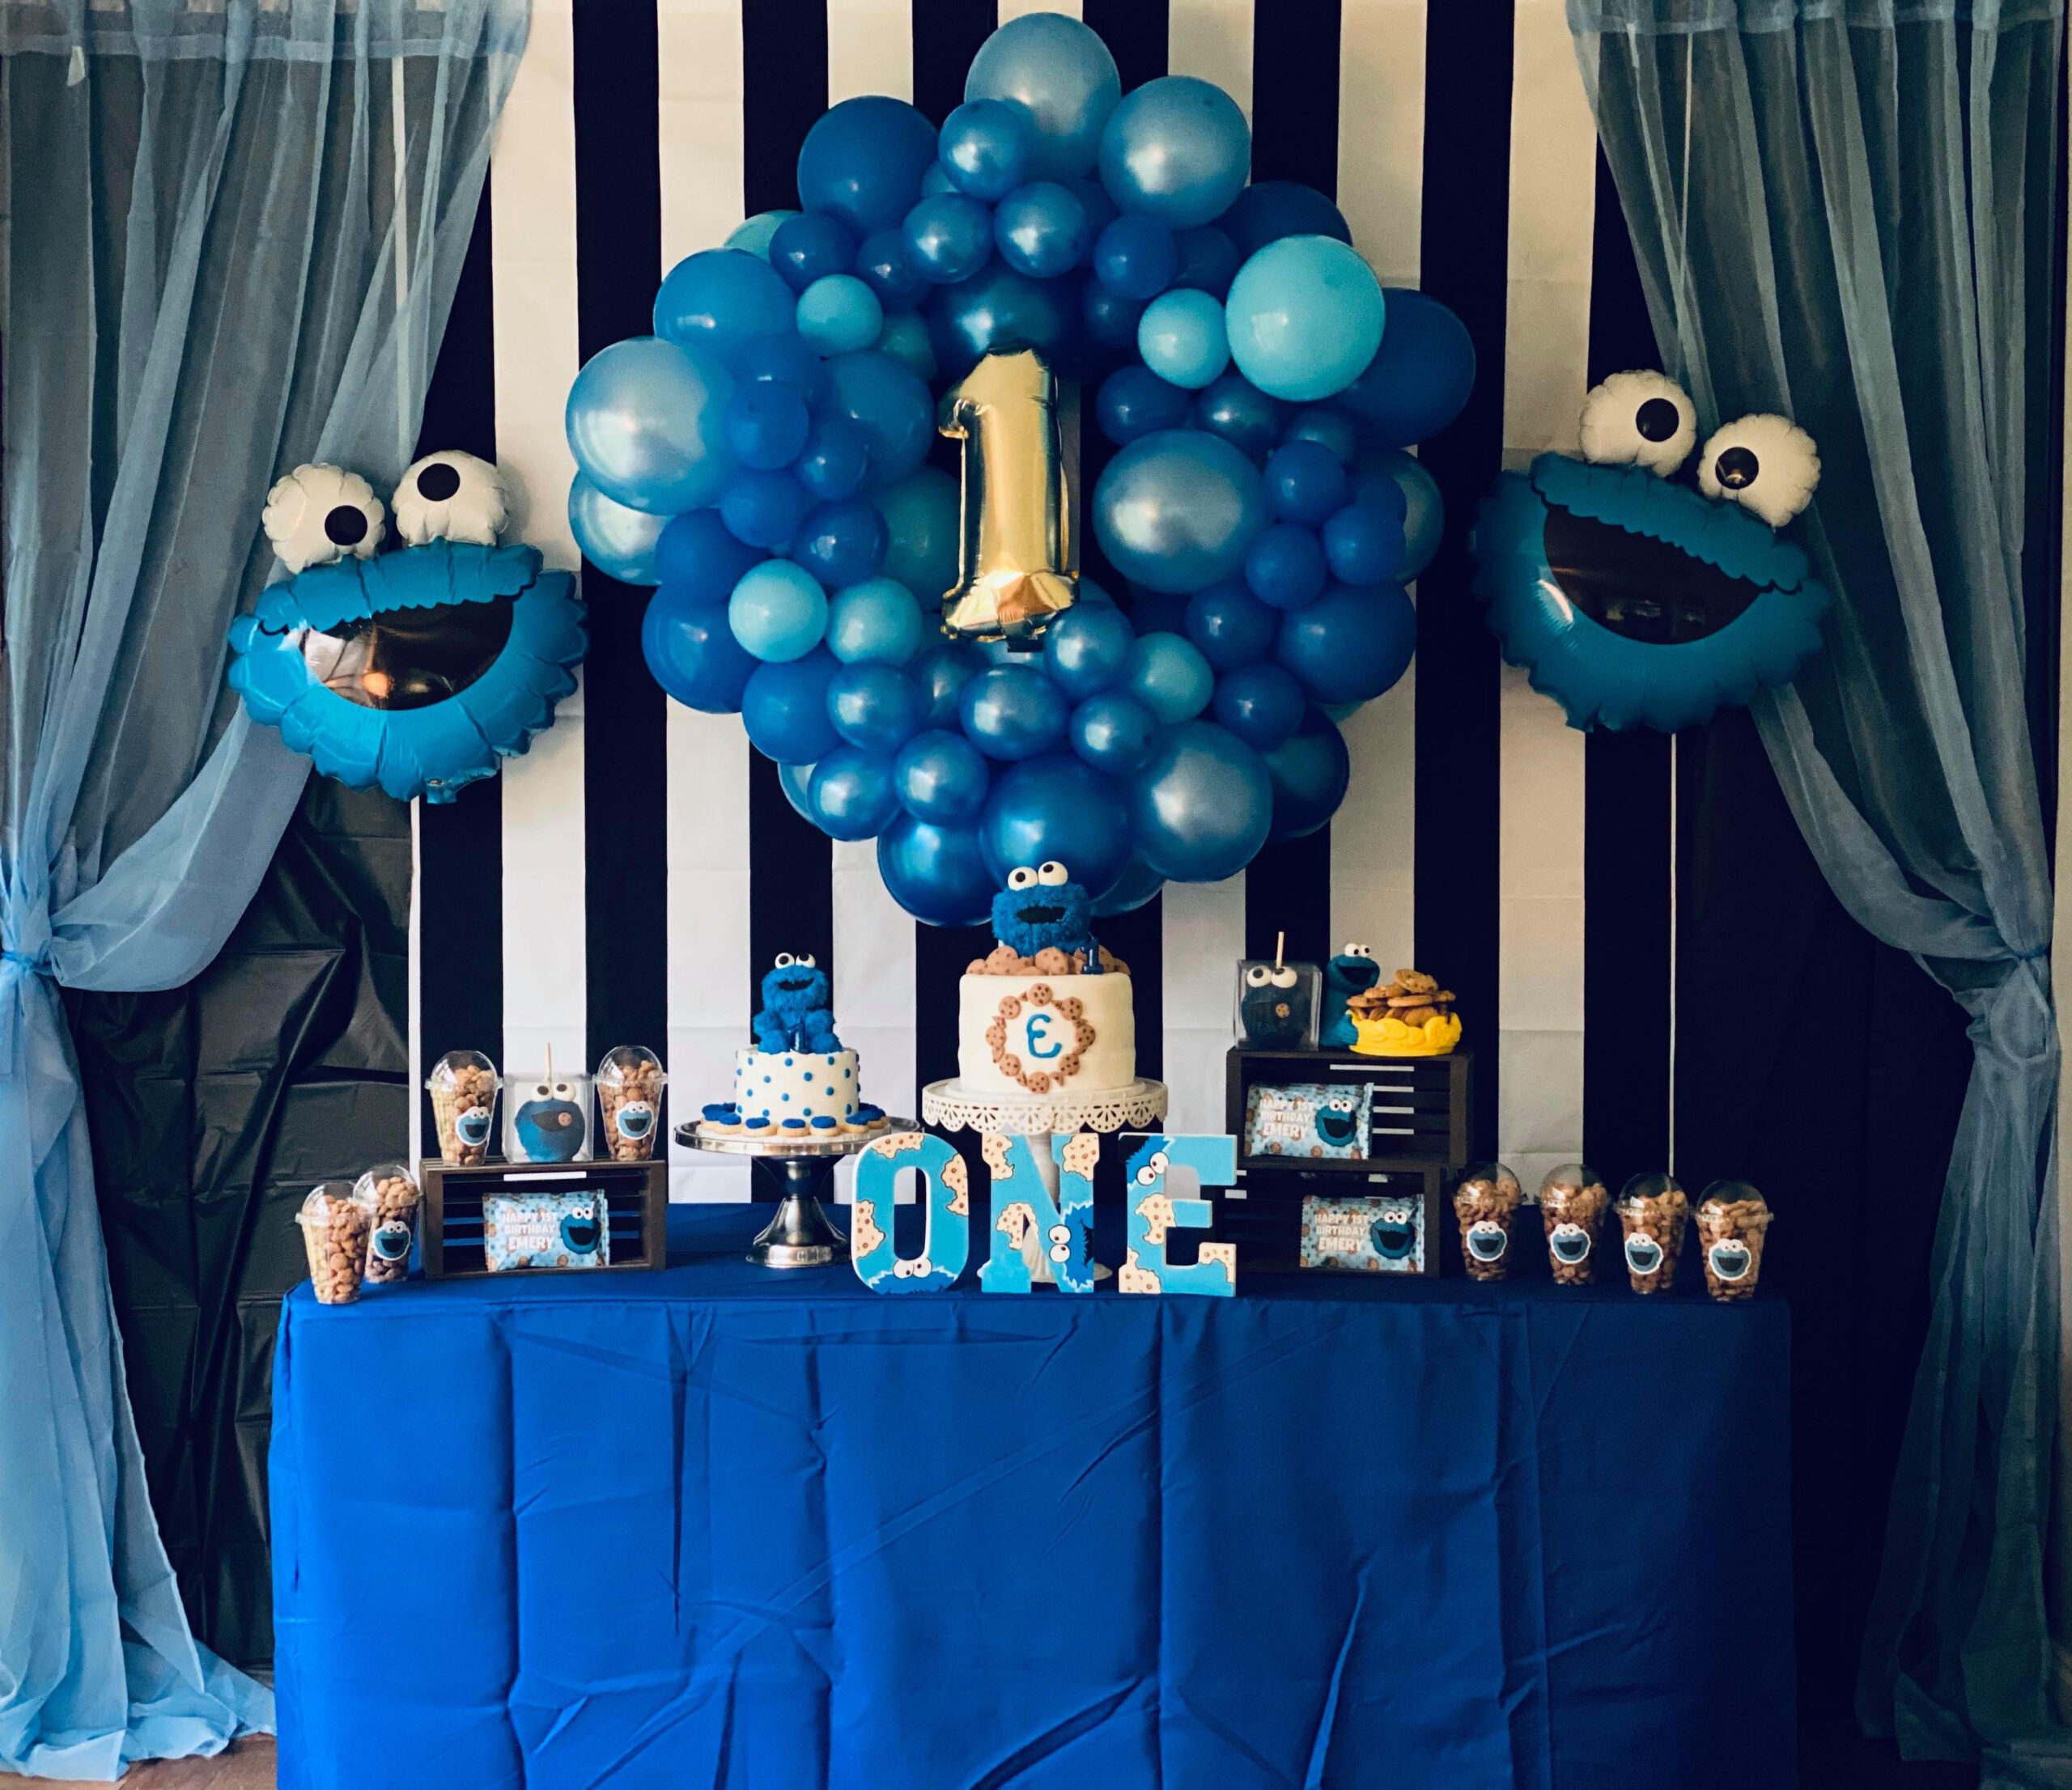 Cookie monster how to balloon garland for 1st Birthday party boy 